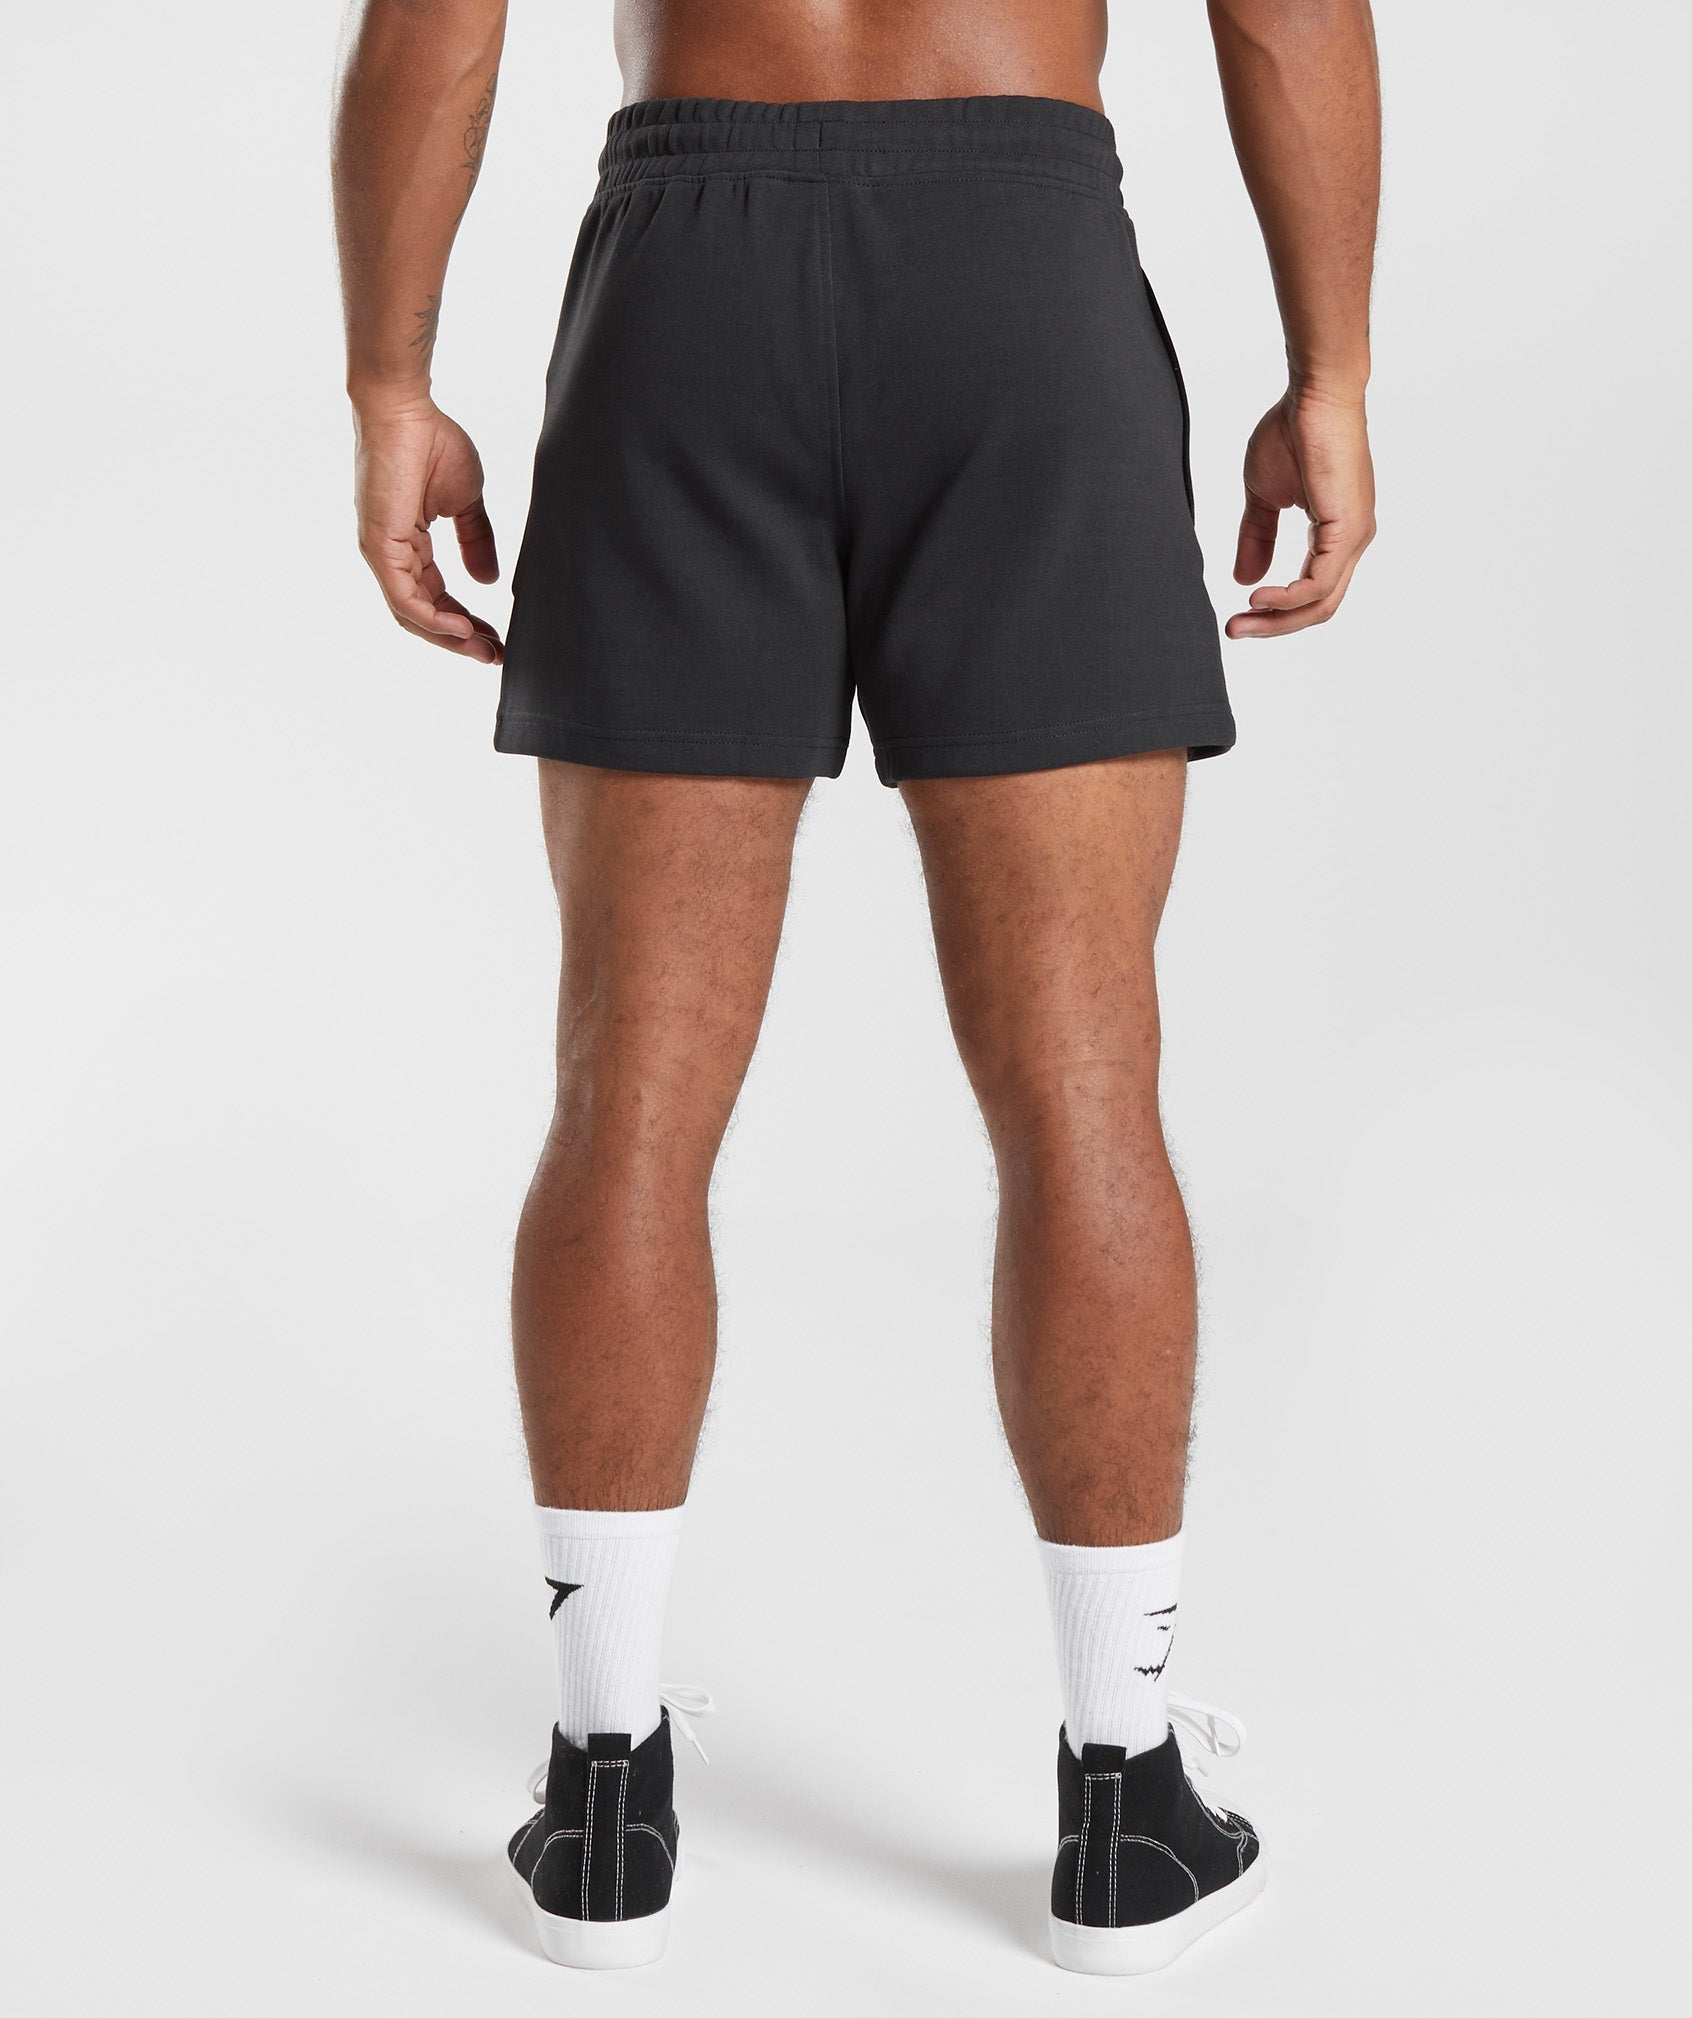 React 5" Shorts in Black - view 2